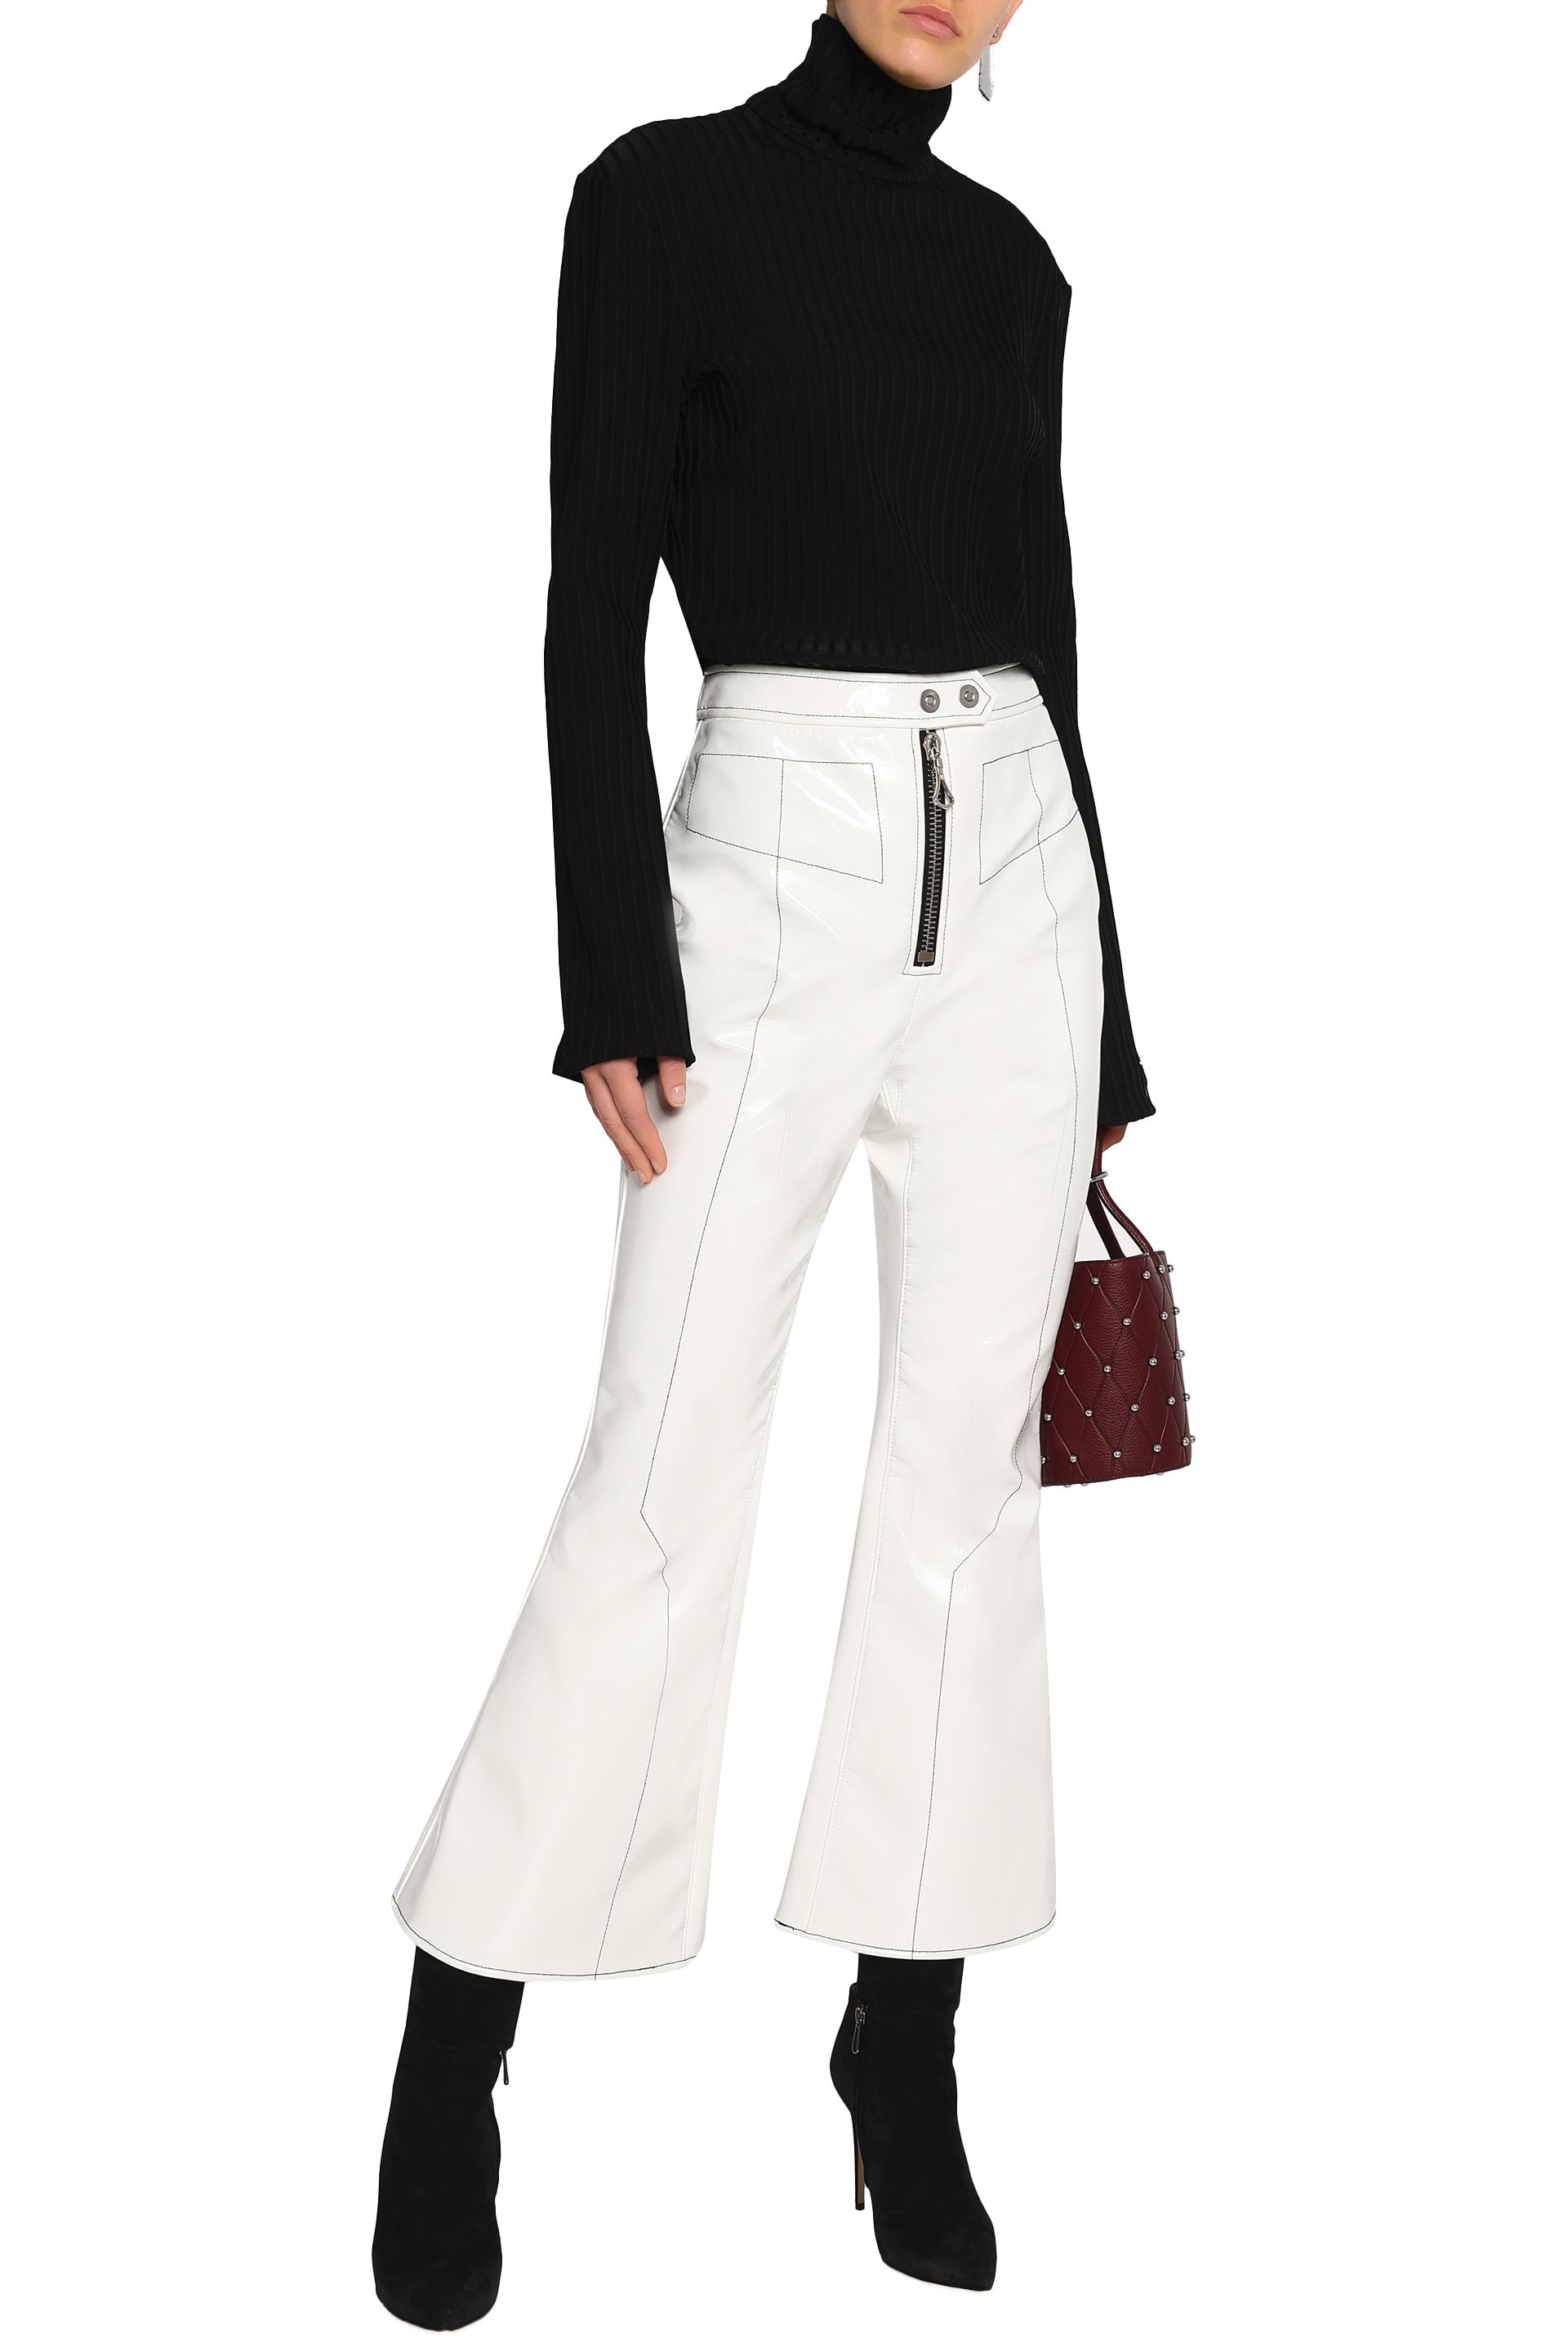 Ellery | Sale up to 70% off | GB | THE OUTNET